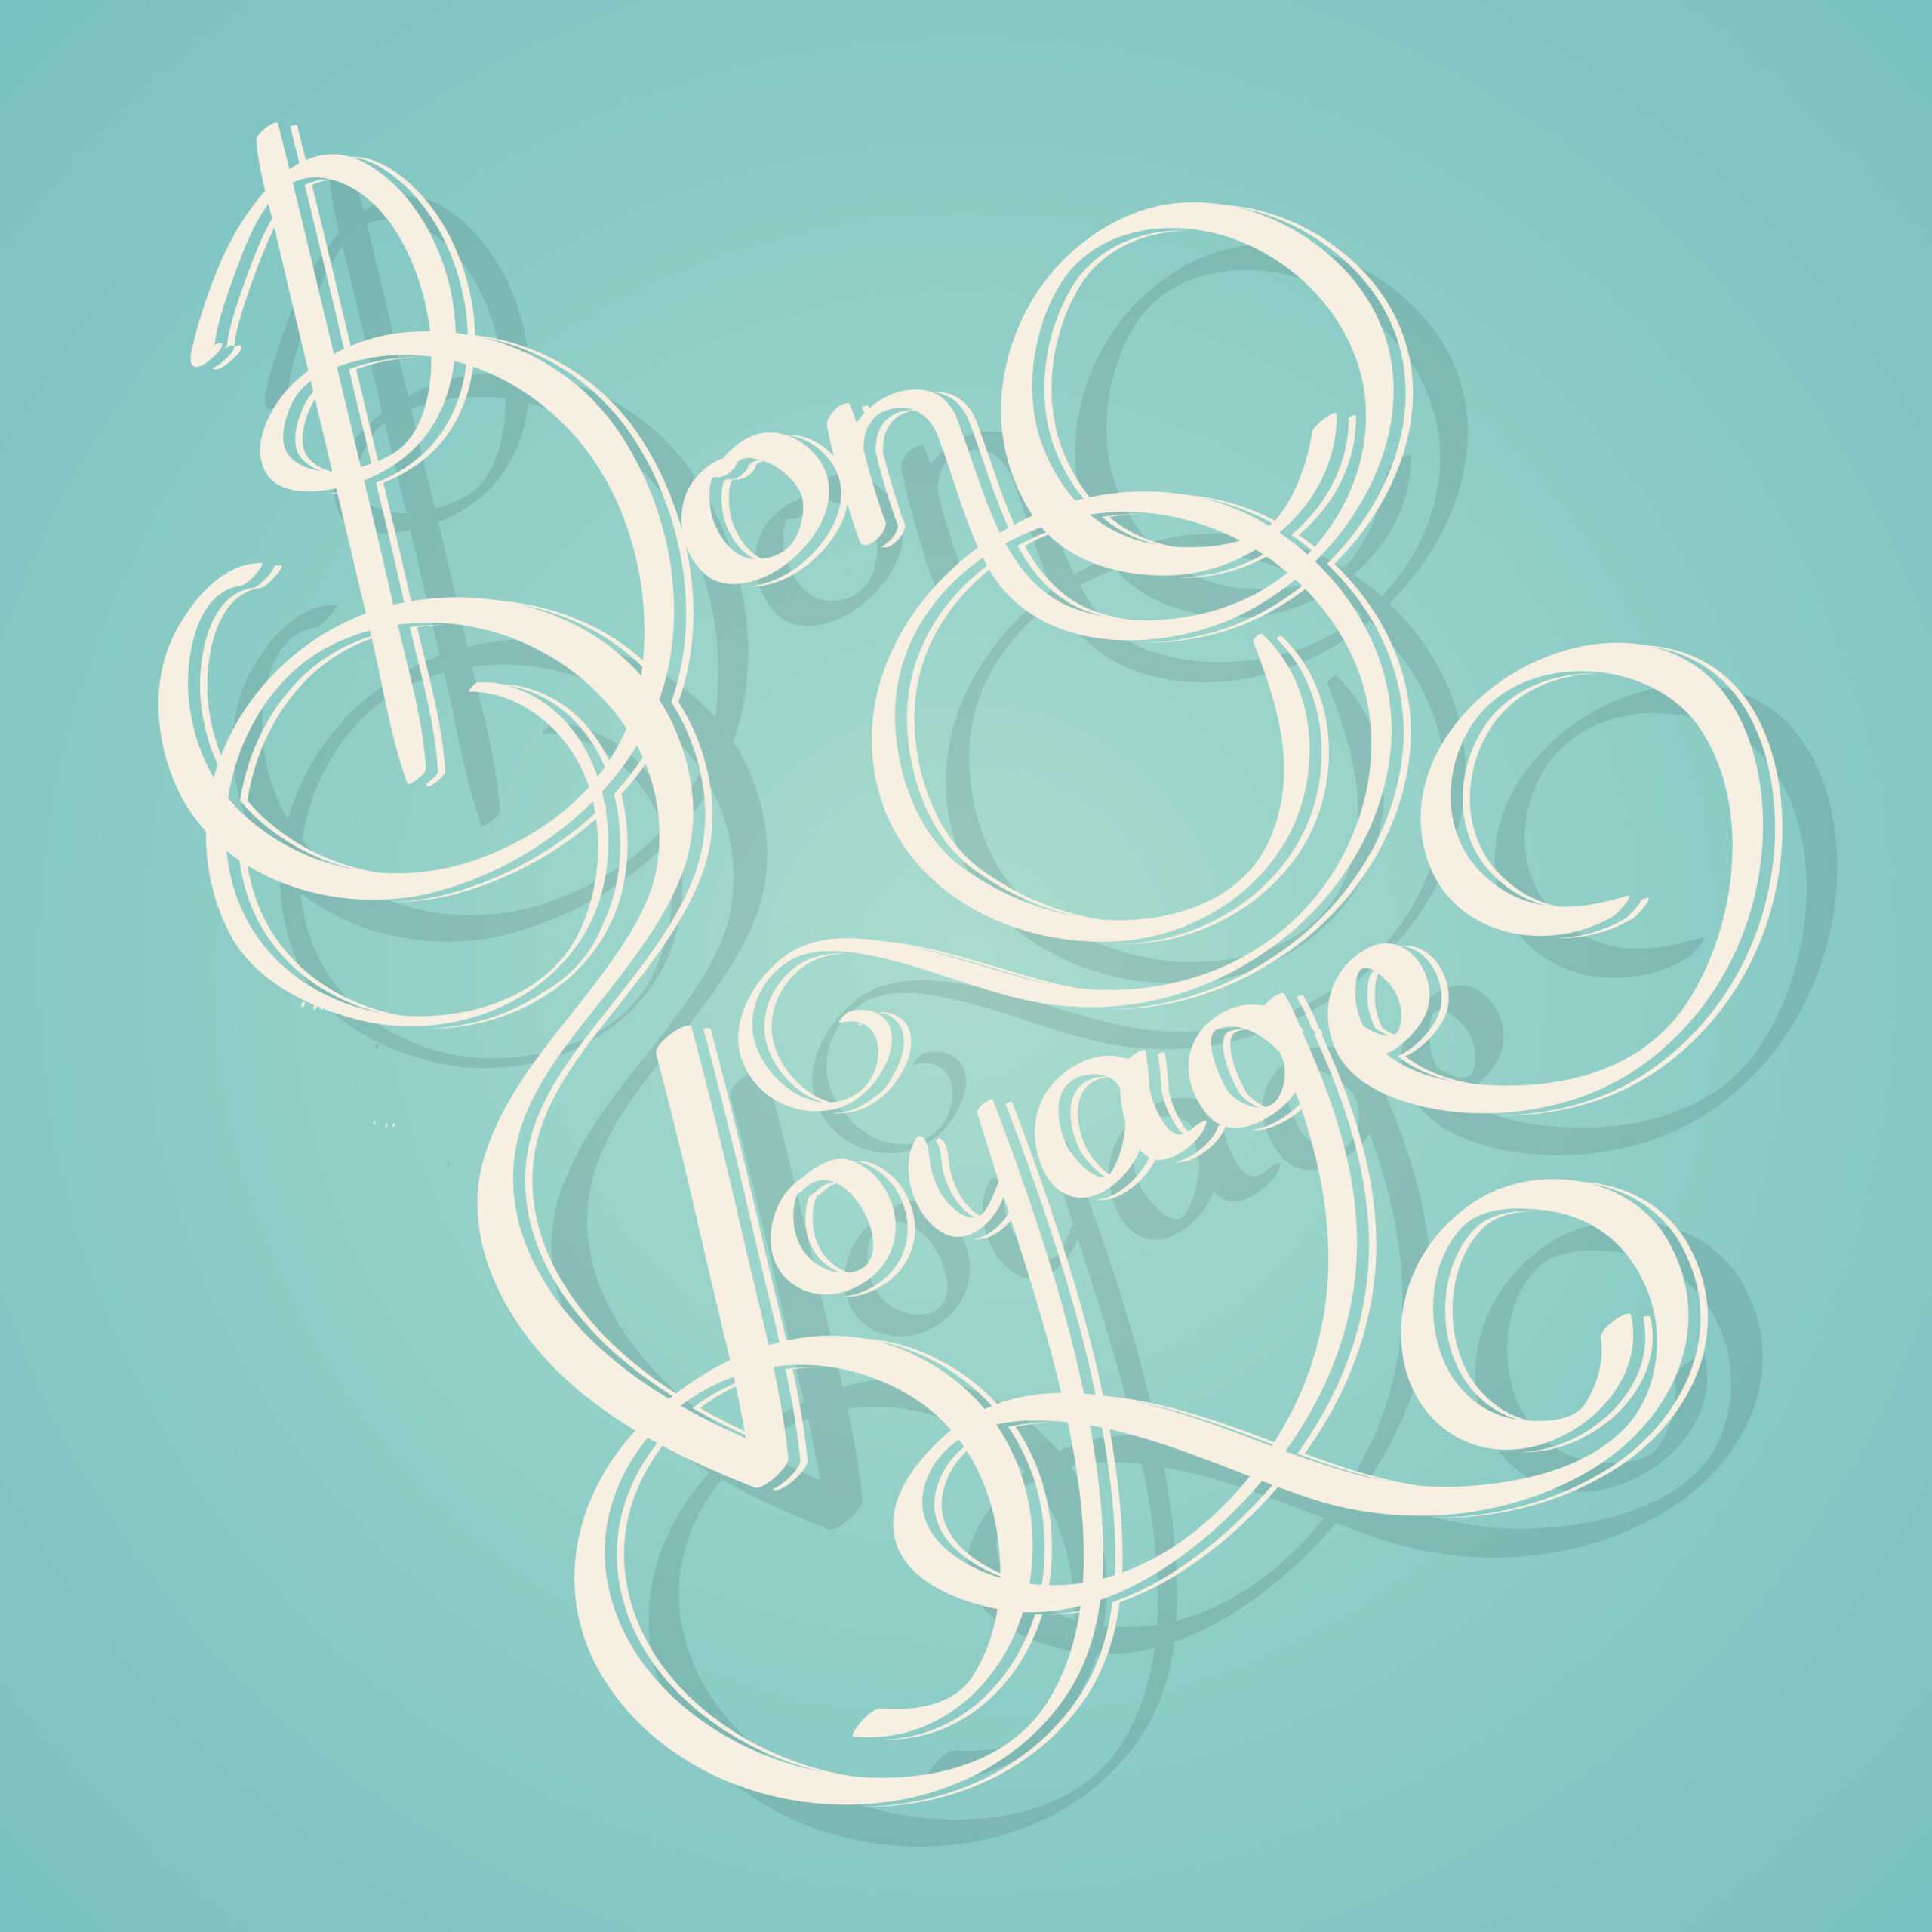 Calligraphy Bon Voyage Text – Download Free Vectors, Clipart Throughout Bon Voyage Card Template